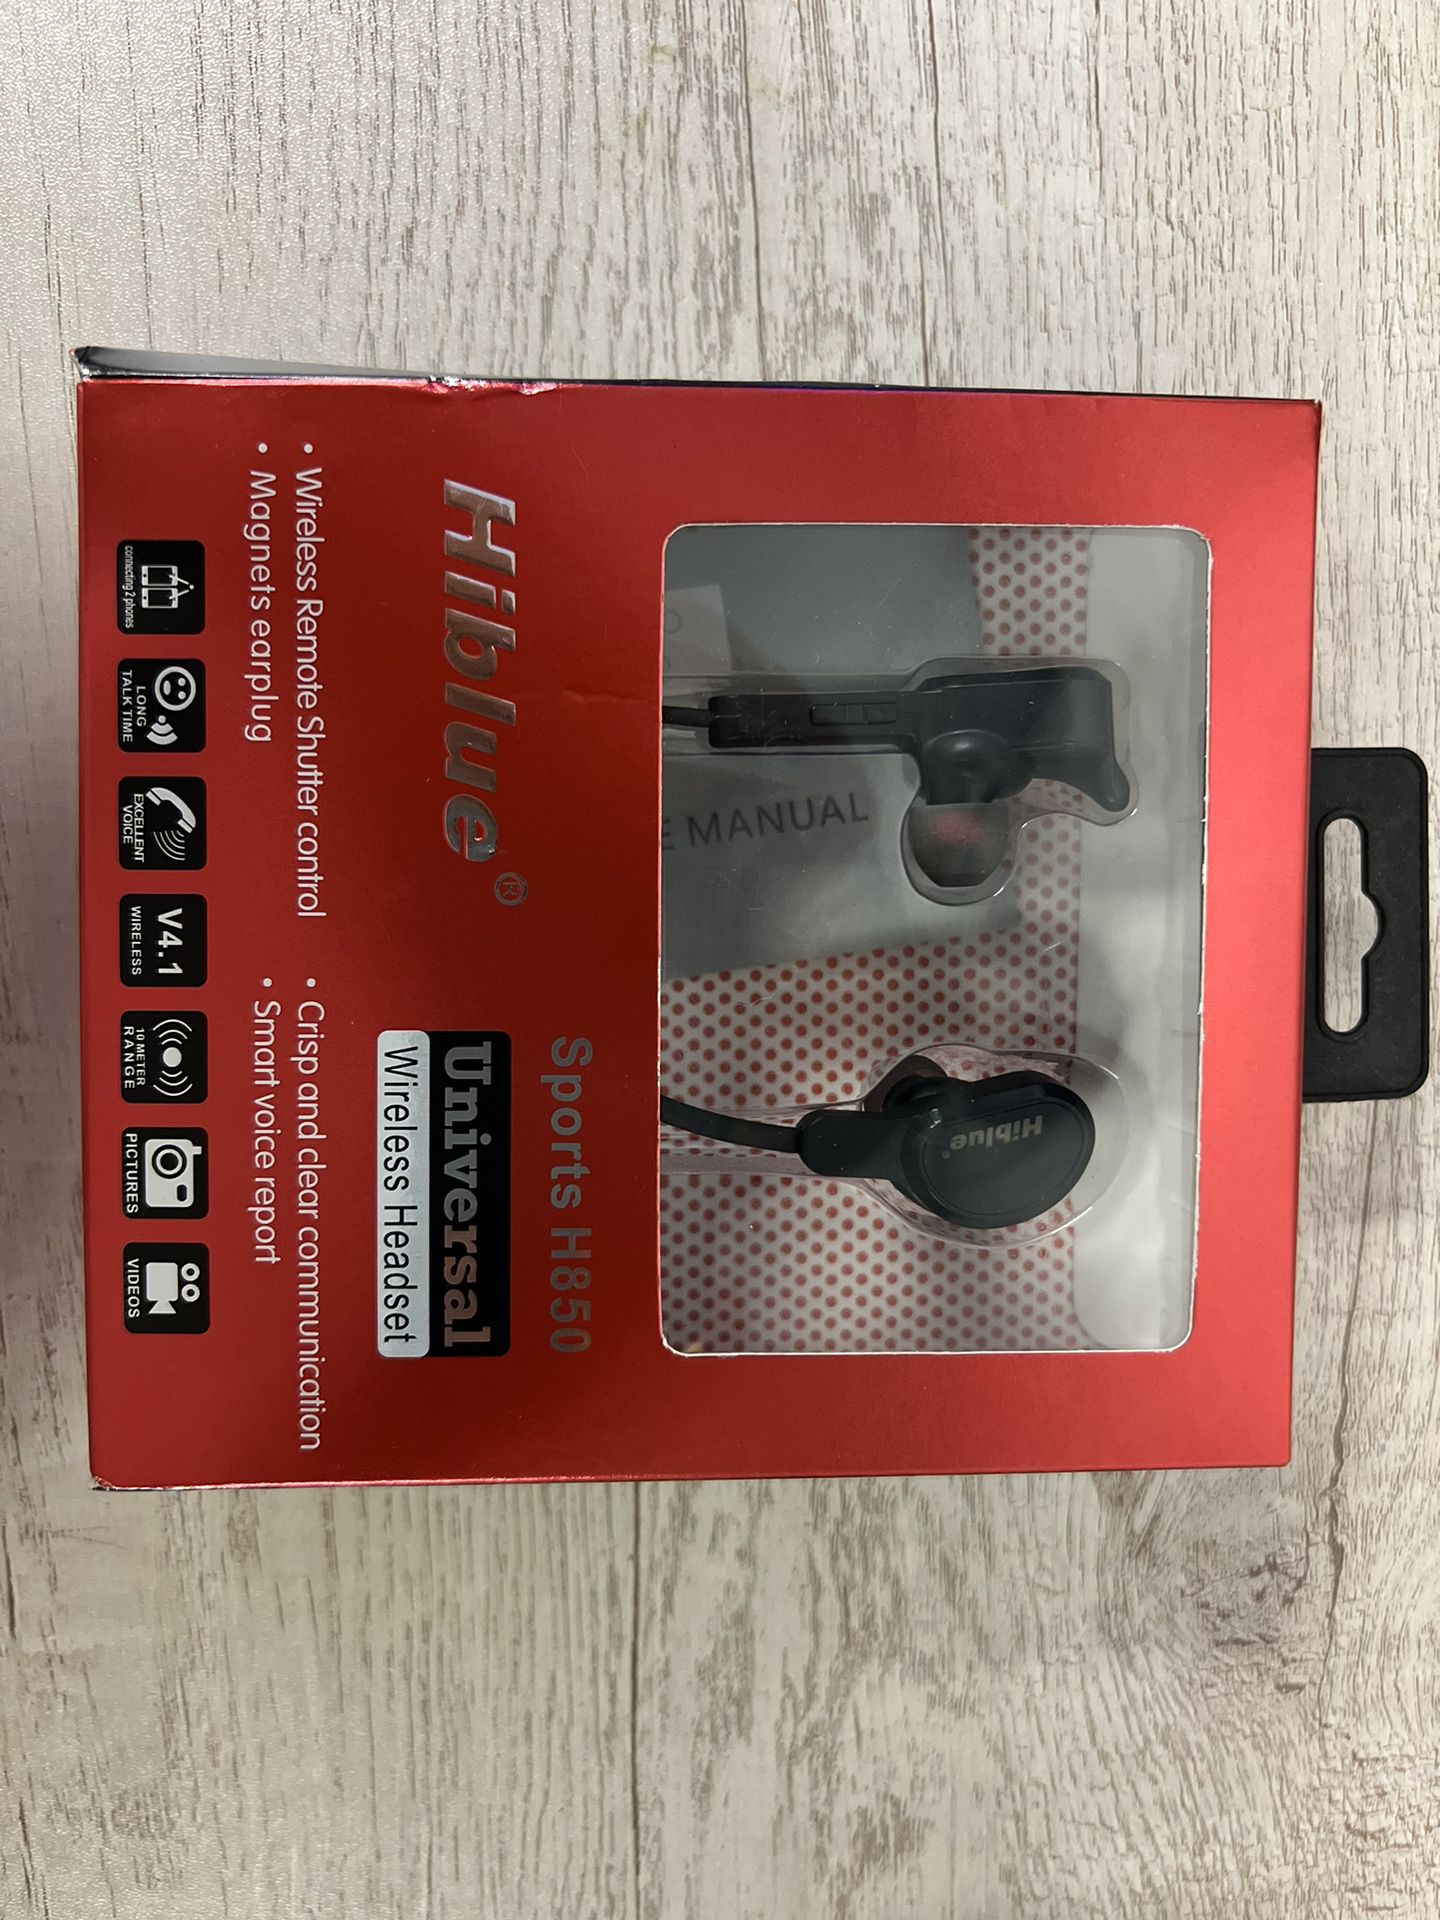 Hiblue sports H850 Earbuds $15